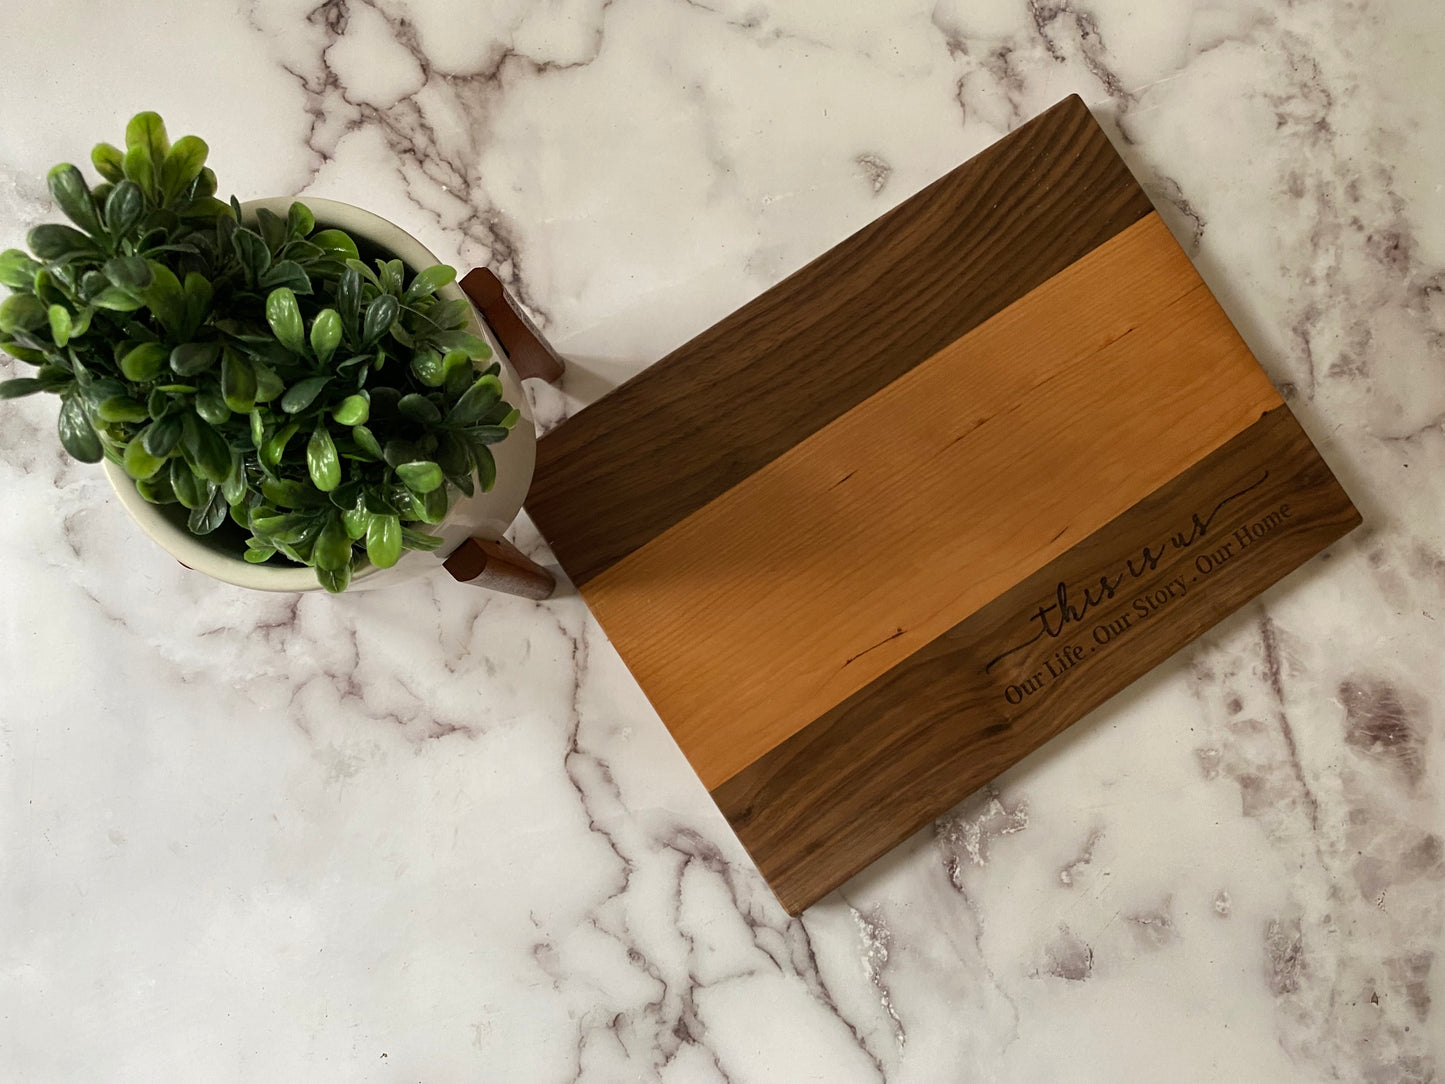 Solid Walnut and Cherry Charcuterie Board "This is us.  Our Life.  Our Story.  Our Home."